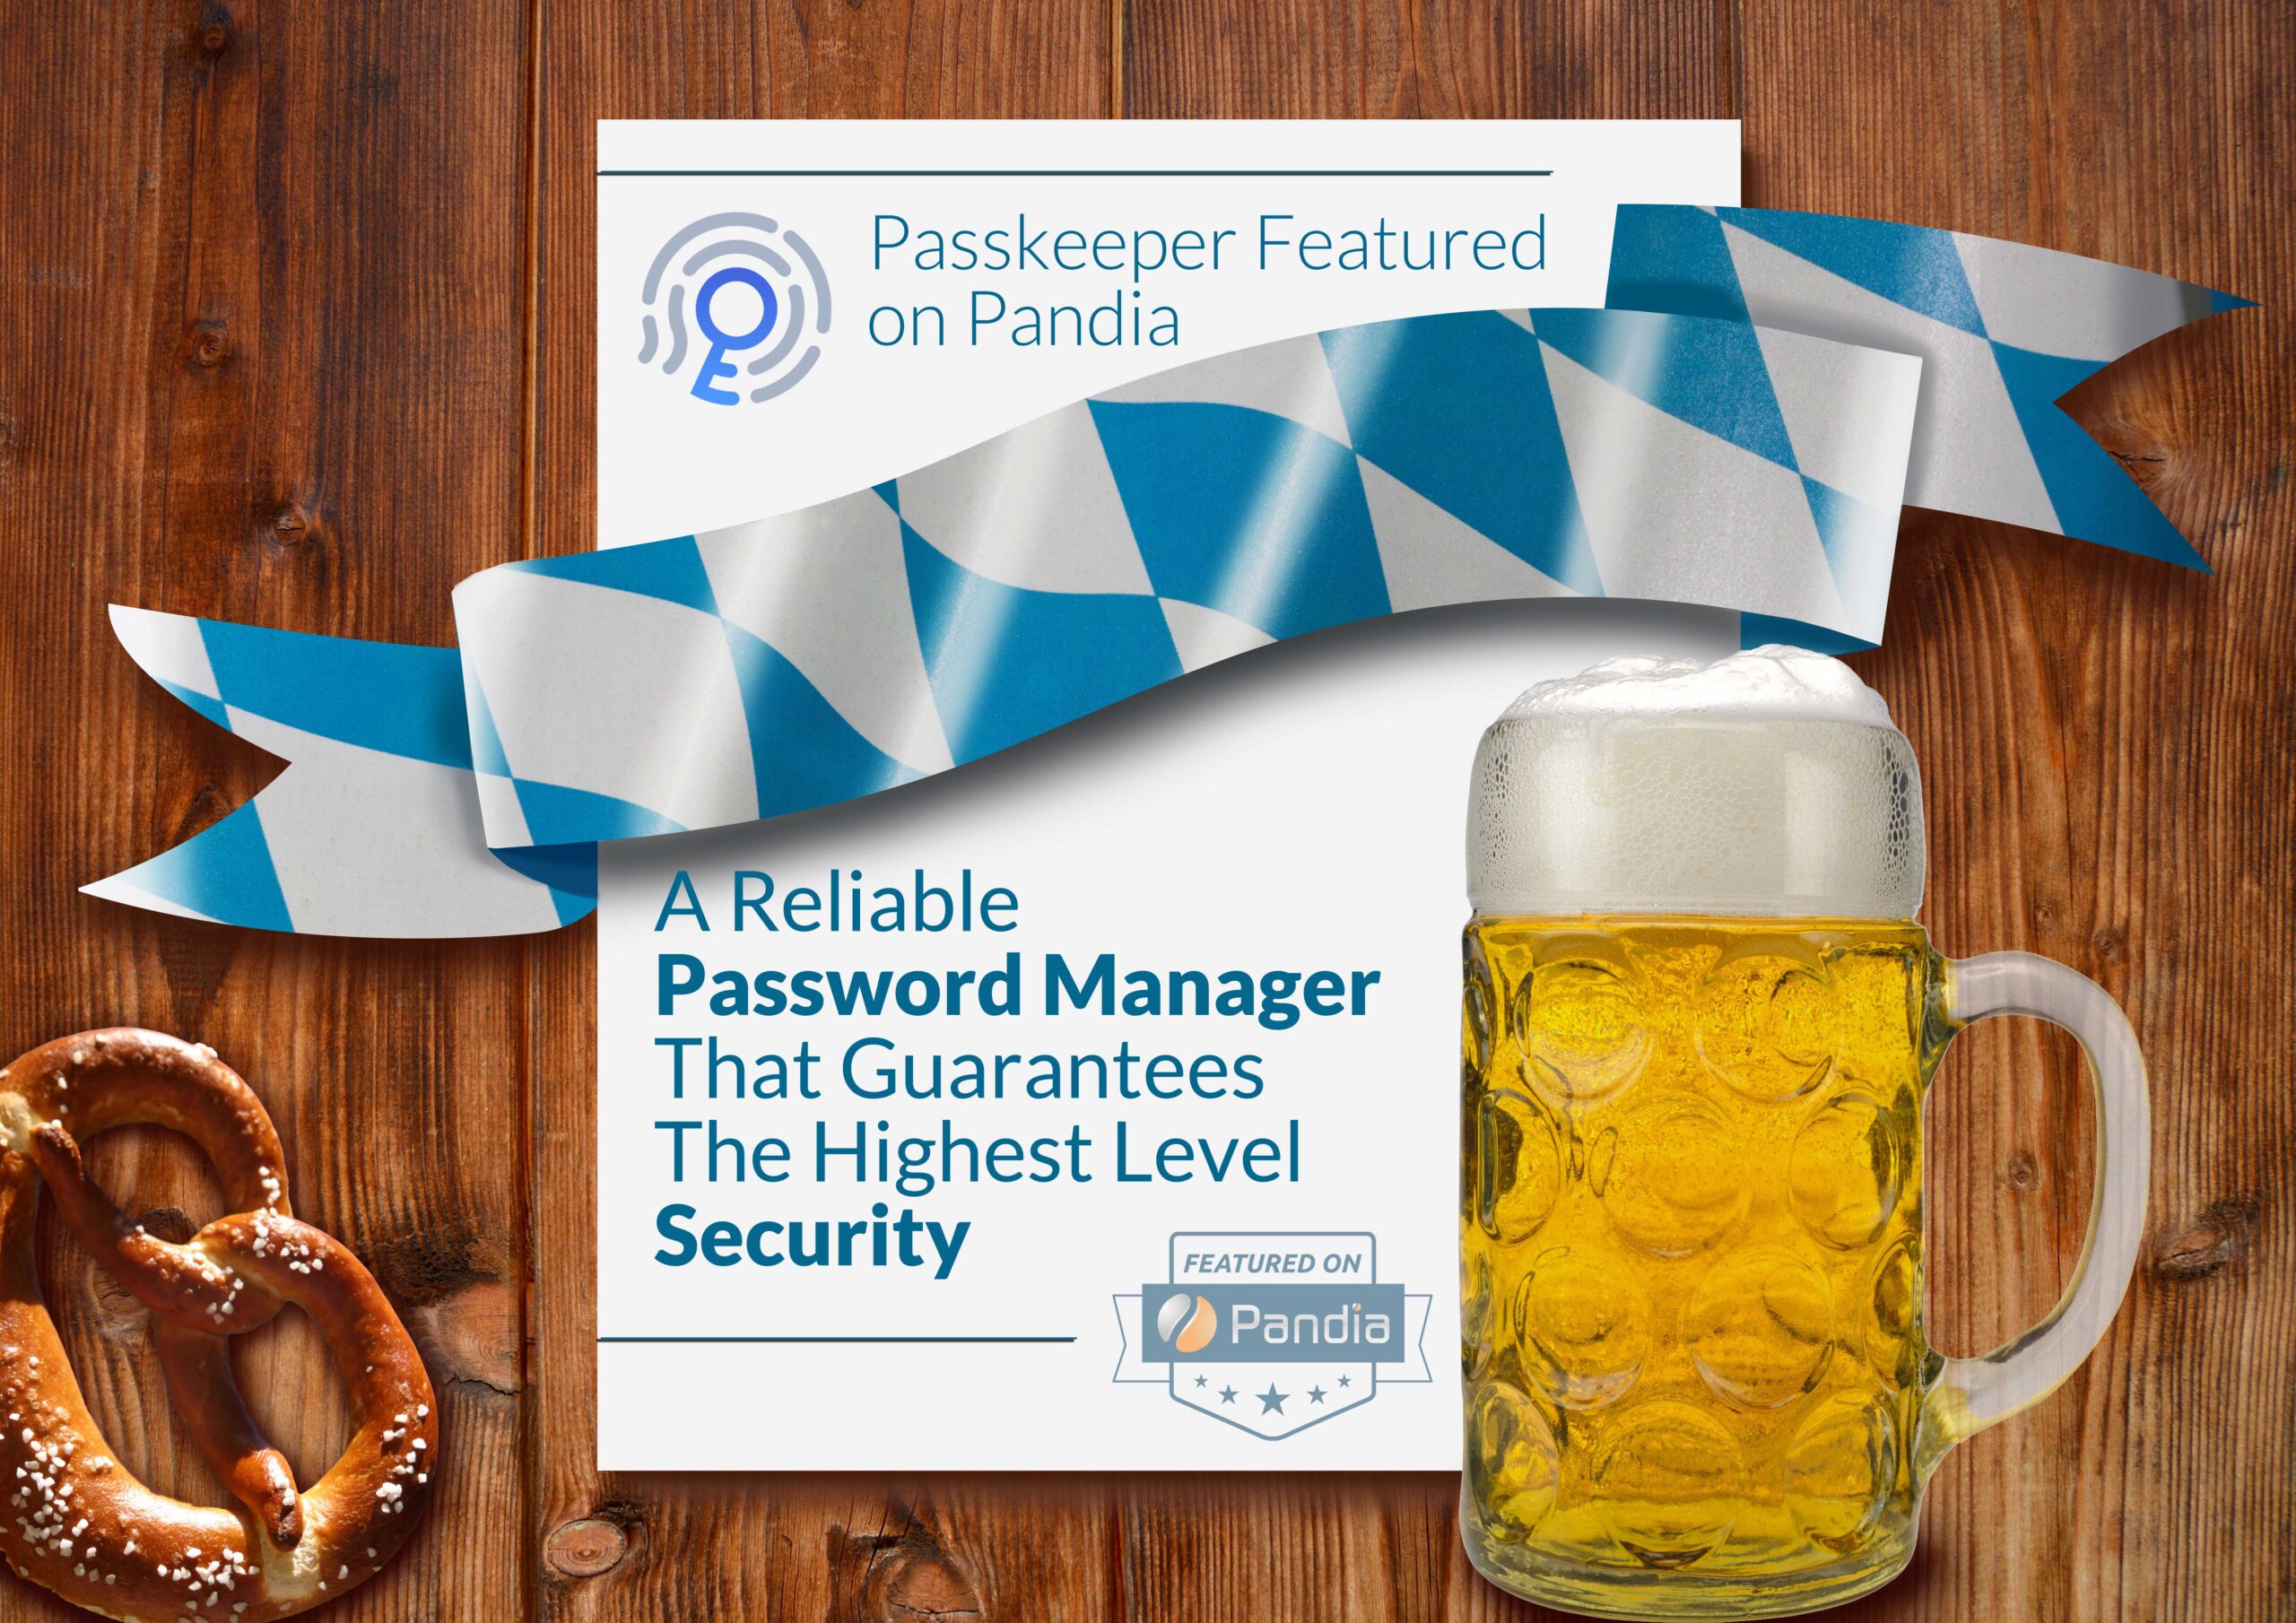 Passkeeper Featured on Pandia: A Reliable Password Manager That Guarantees The Highest Level Security